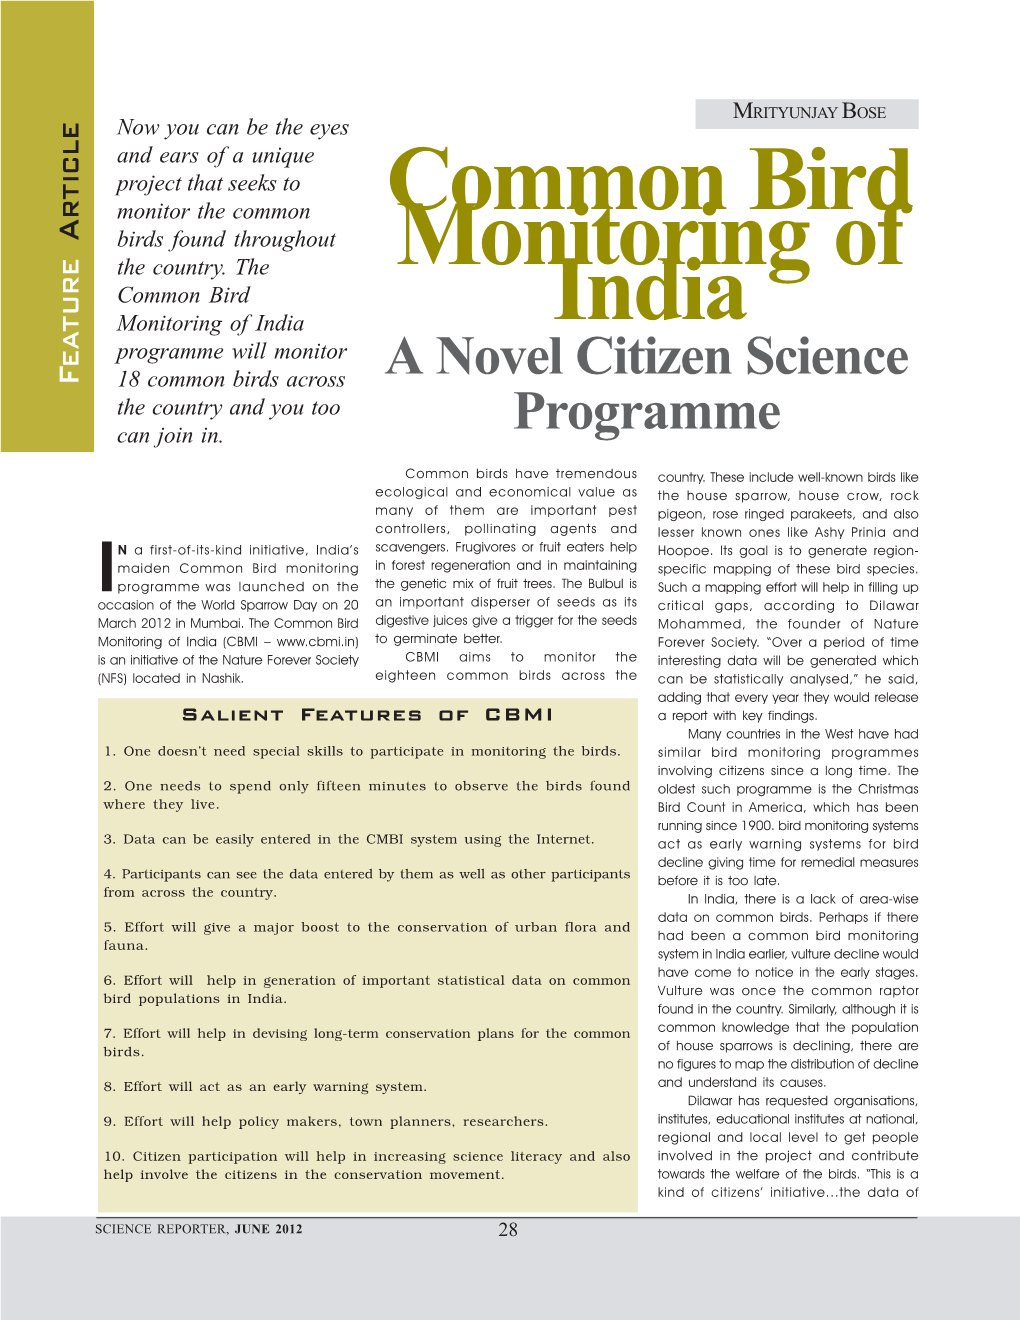 Common Bird Monitoring of India India Programme Will Monitor a Novel Citizen Science Feature Feature 18 Common Birds Across the Country and You Too Can Join In